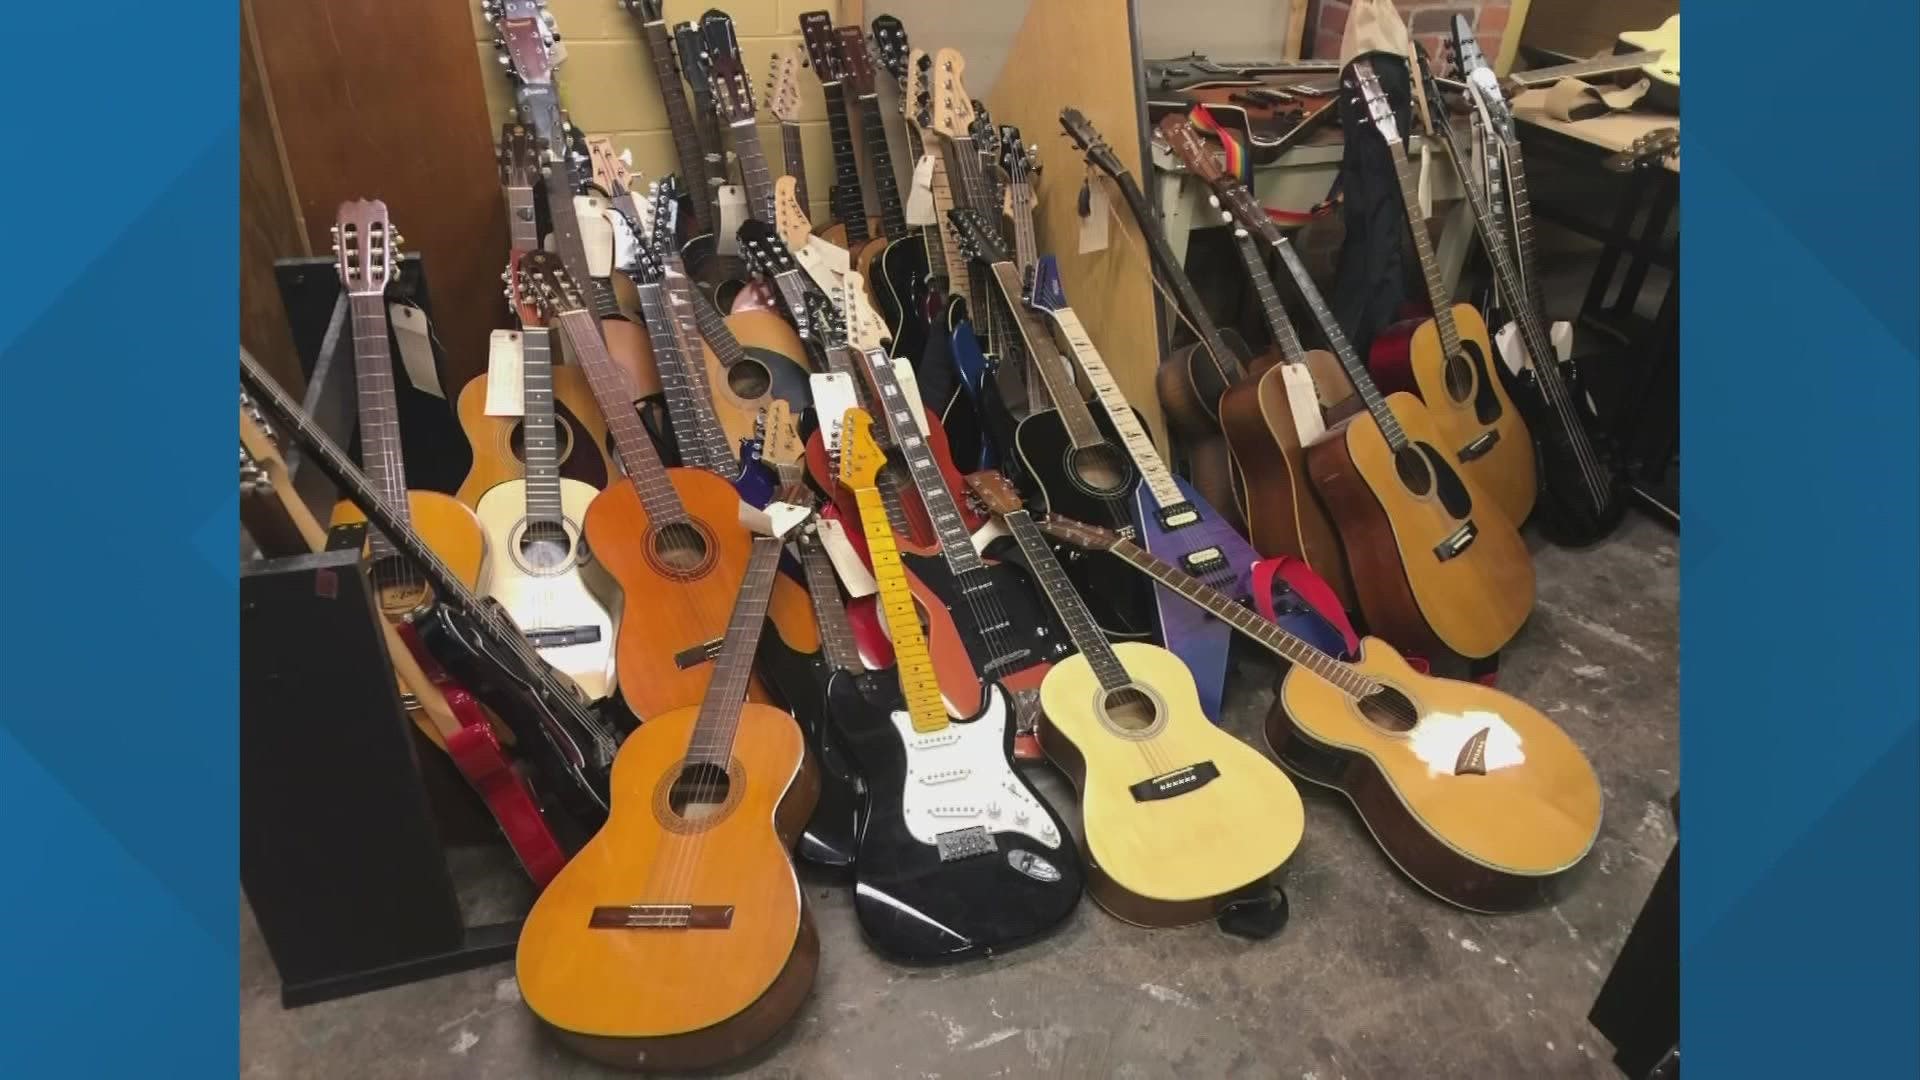 The Columbus Music Commission started the drive to donate instruments to children who may not have access to them otherwise.